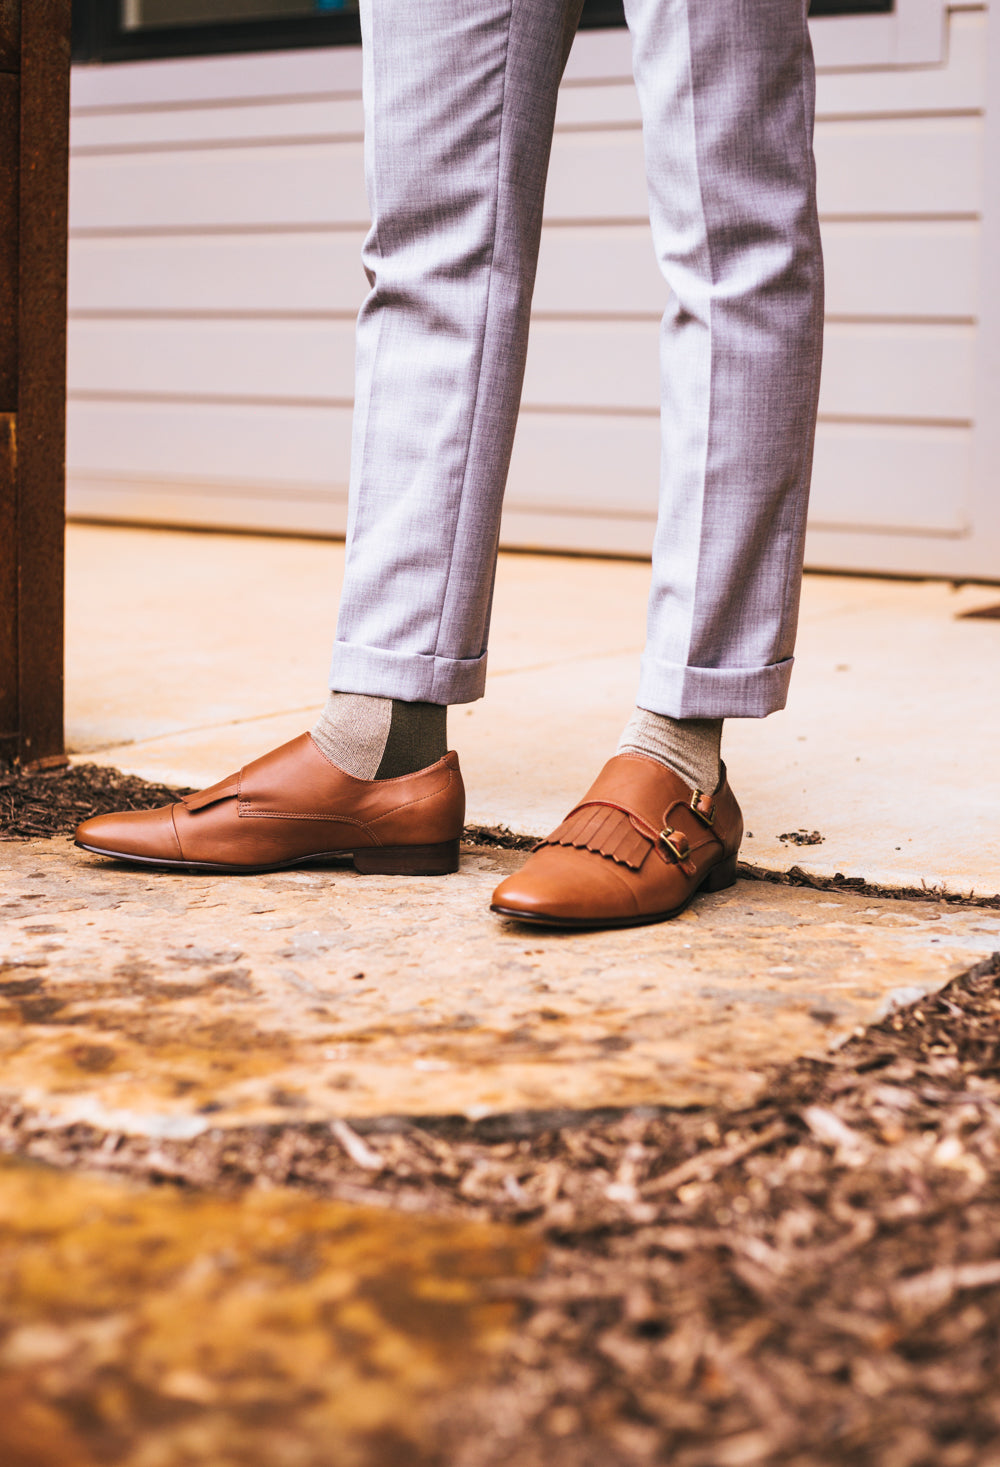 light brown over the calf dress socks with brown stripe, brown shoes, grey dress pants